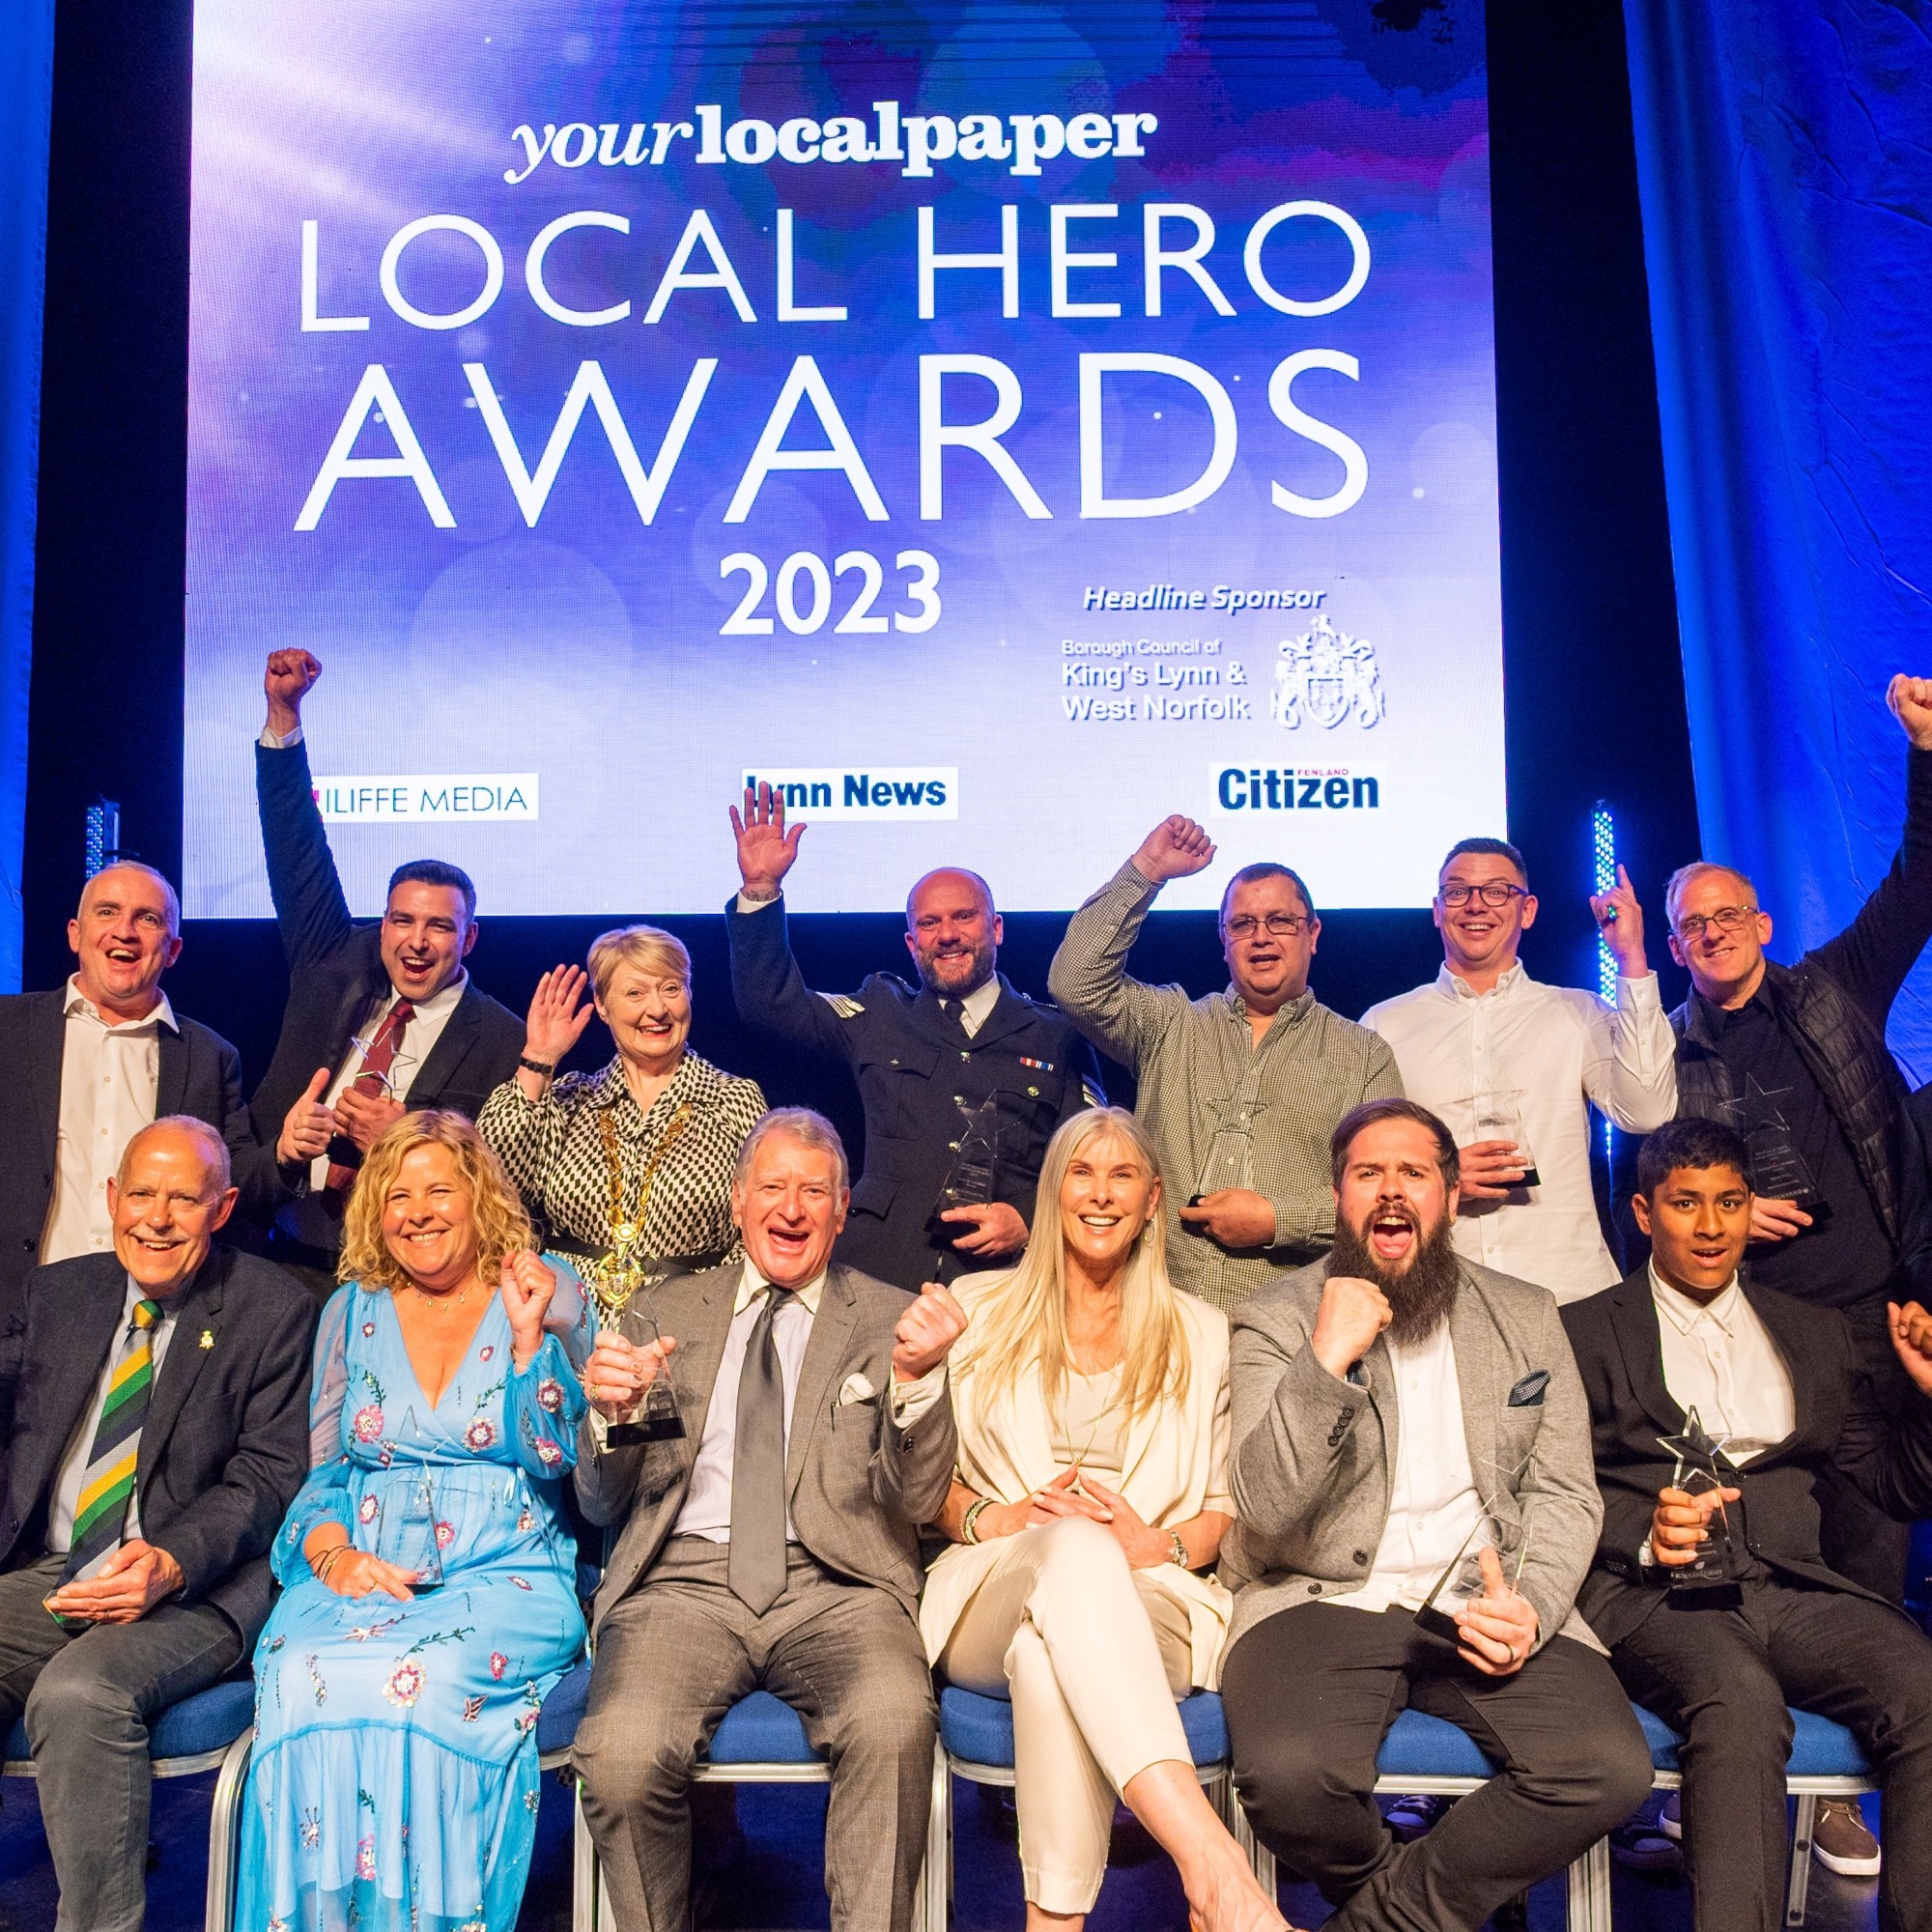 A picture of the winners, with Sharron Davies MBE, at the 2023 Local Hero Awards. Photo courtesy of Your Local Paper